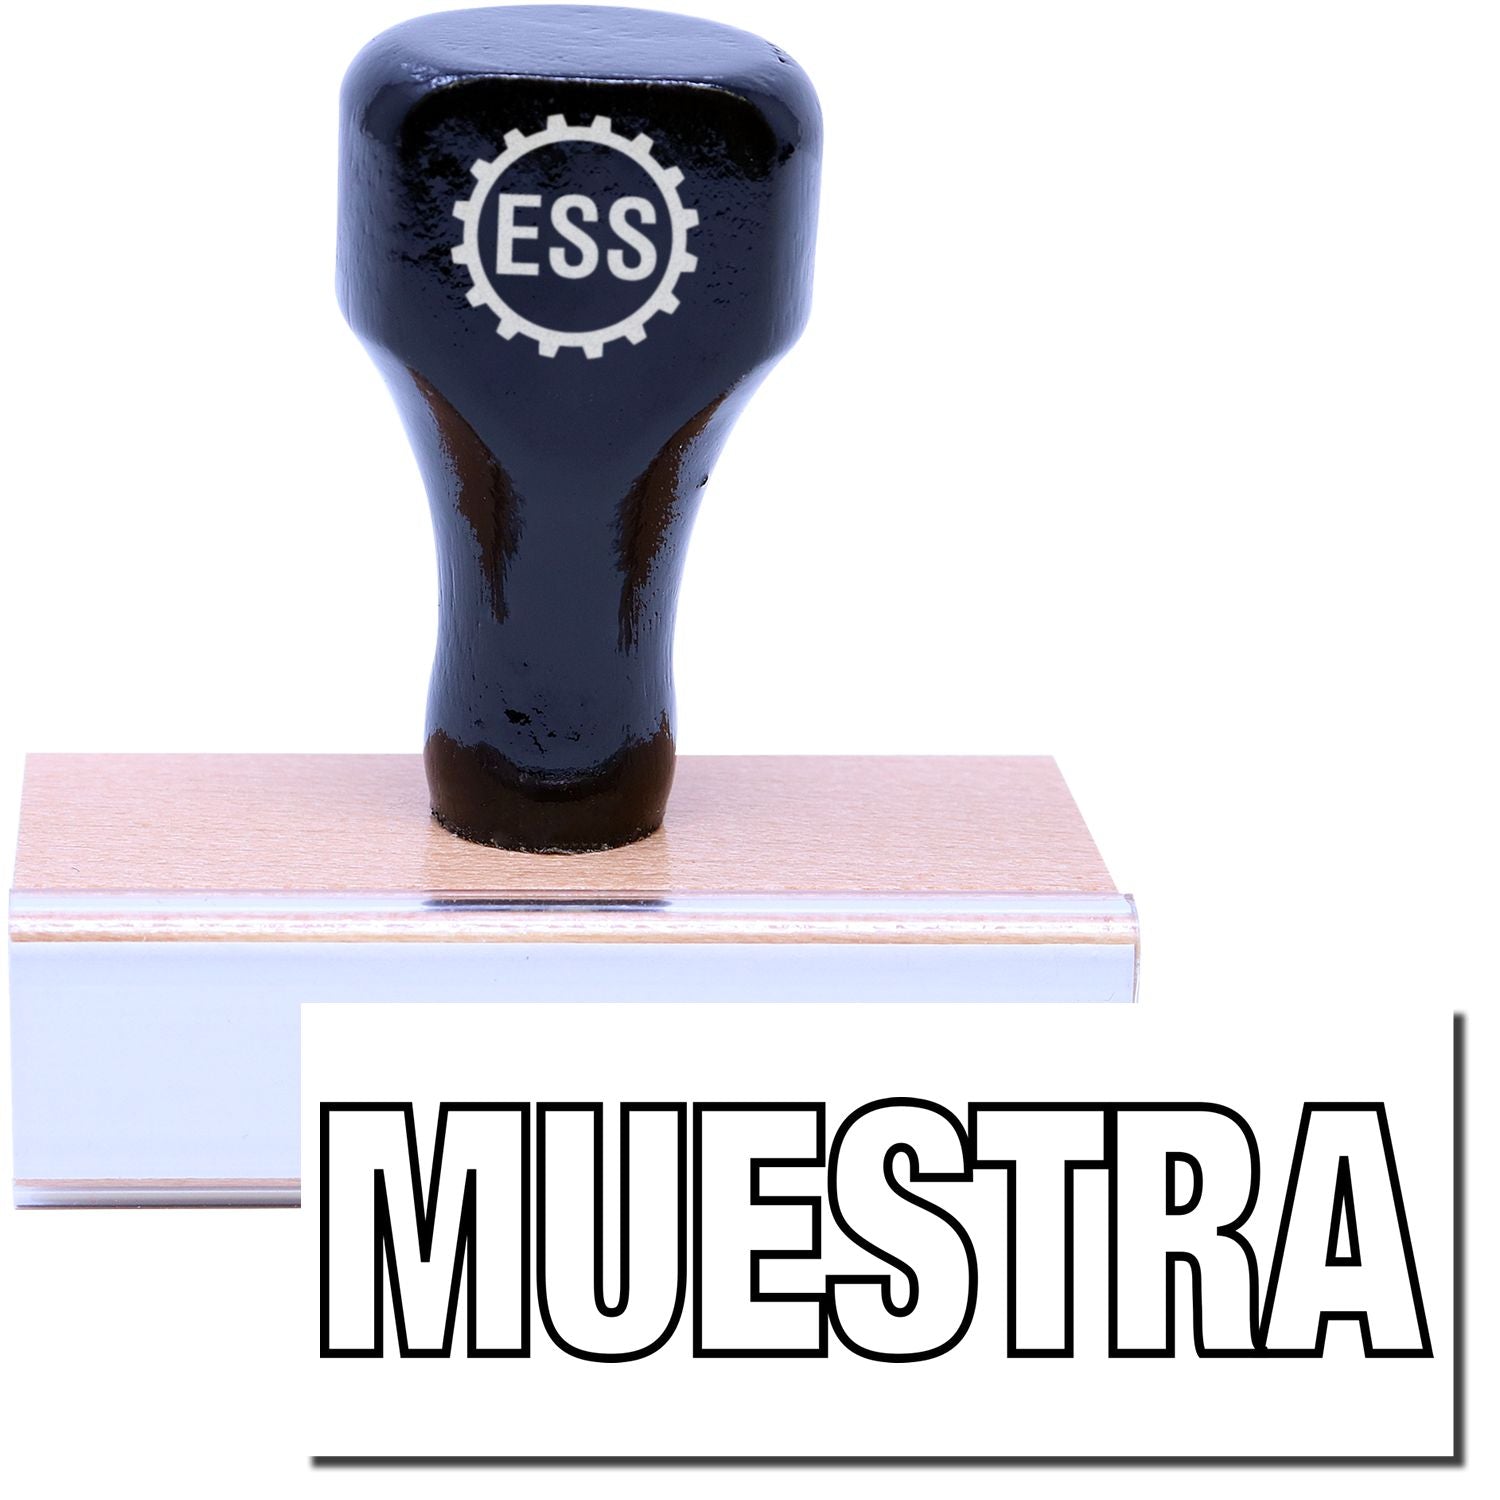 A stock office rubber stamp with a stamped image showing how the text "MUESTRA" in an outline font is displayed after stamping.